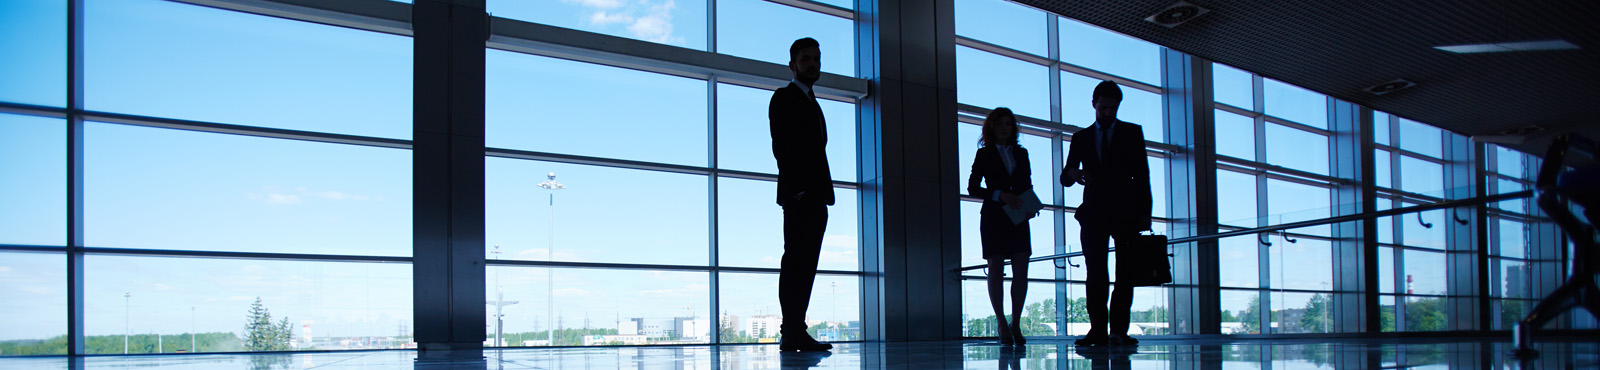 photo of business people silhouettes in front of a large window